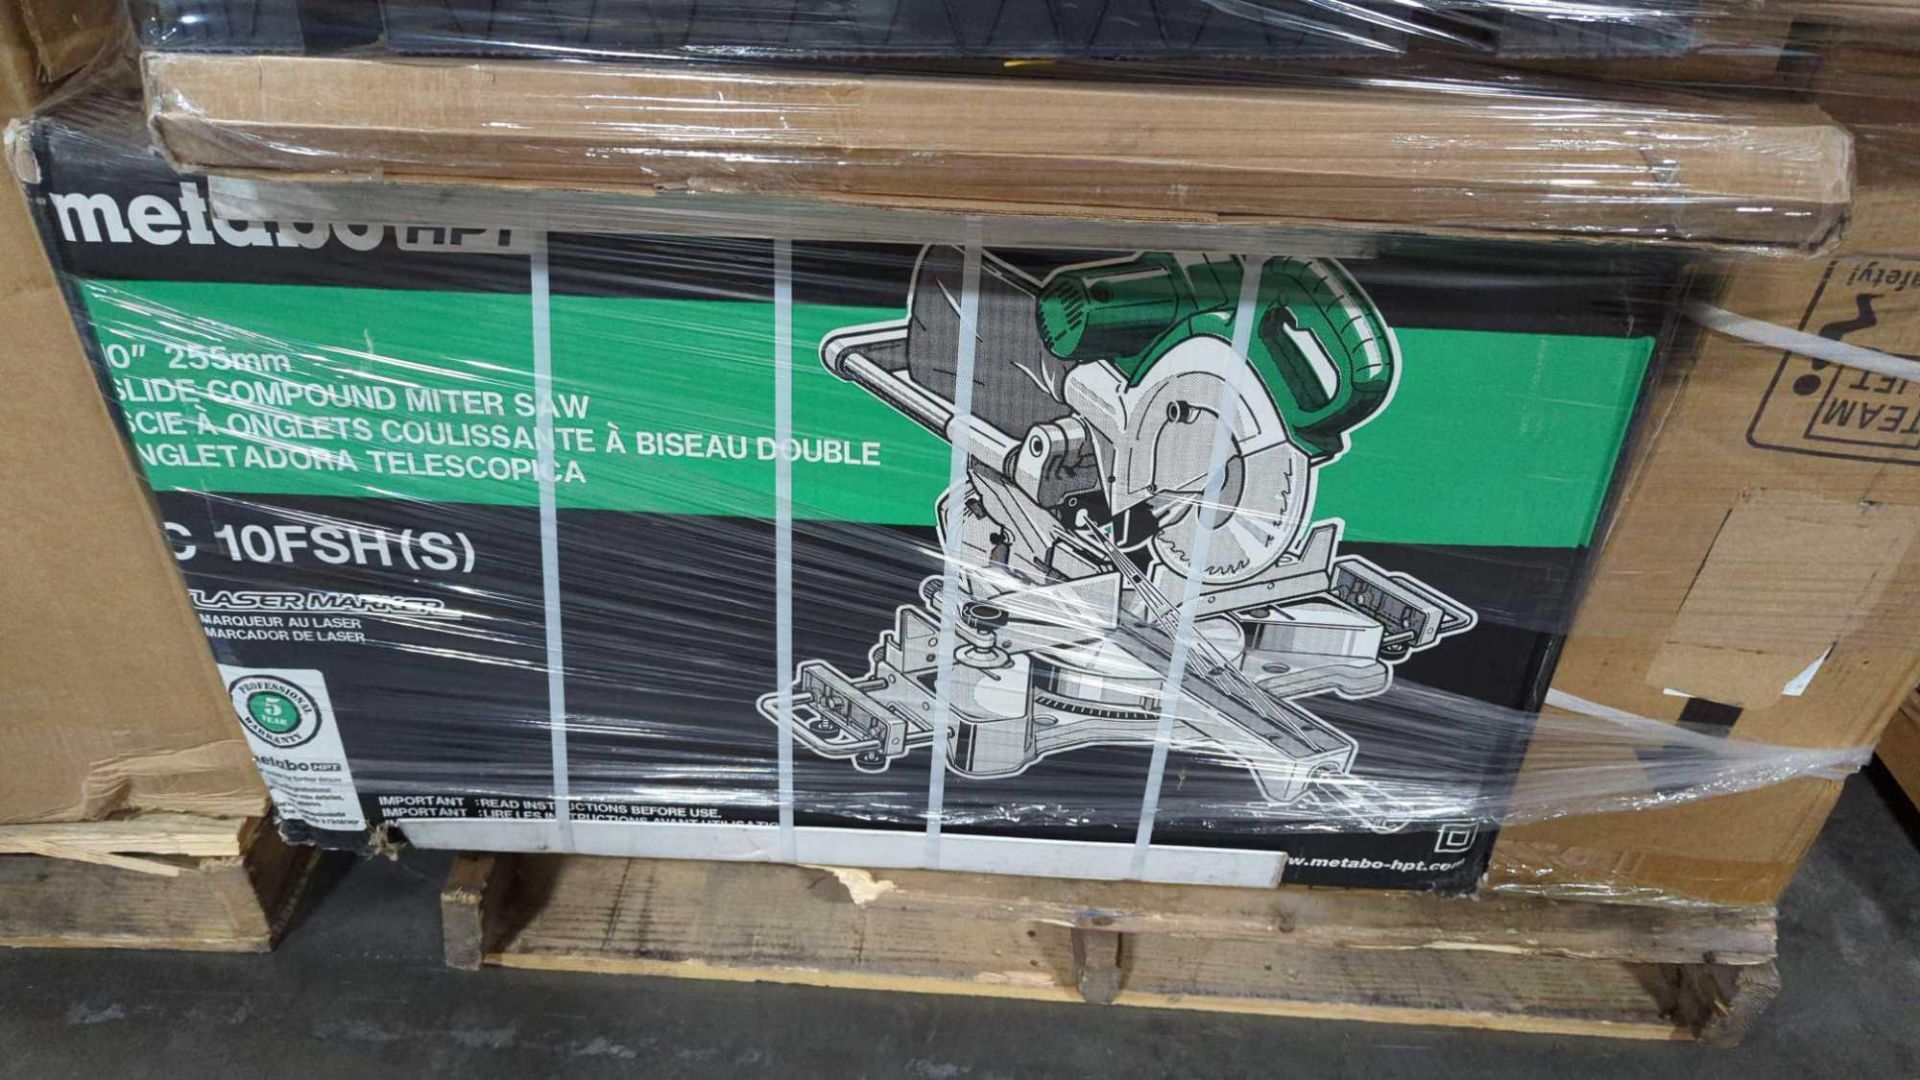 Metabo glide compound miter saw - Image 2 of 11